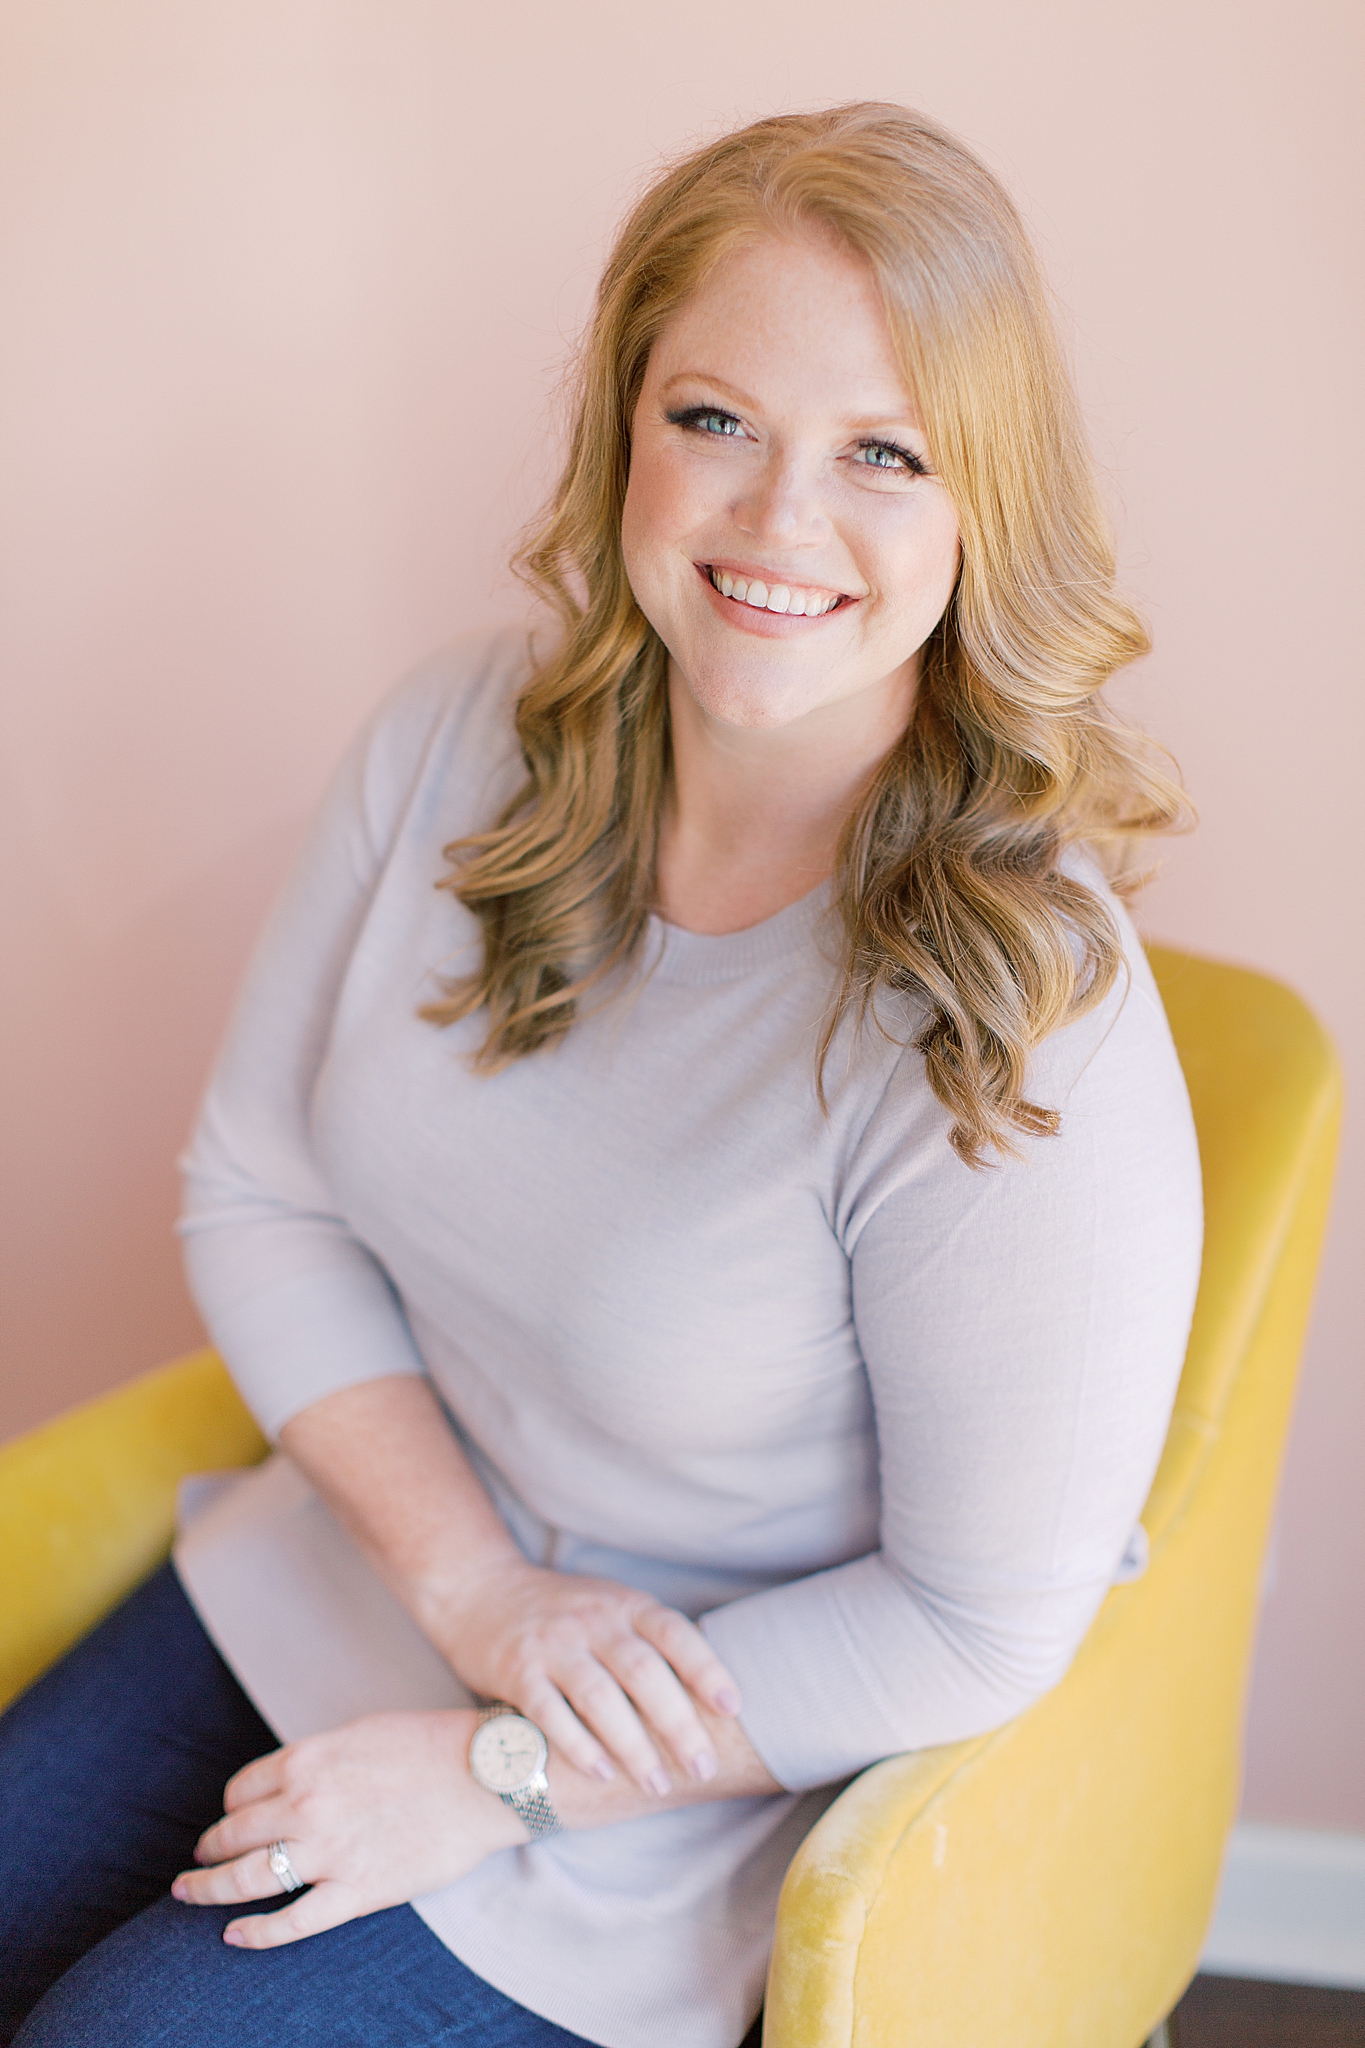 wedding planner sits in yellow chair during branding session